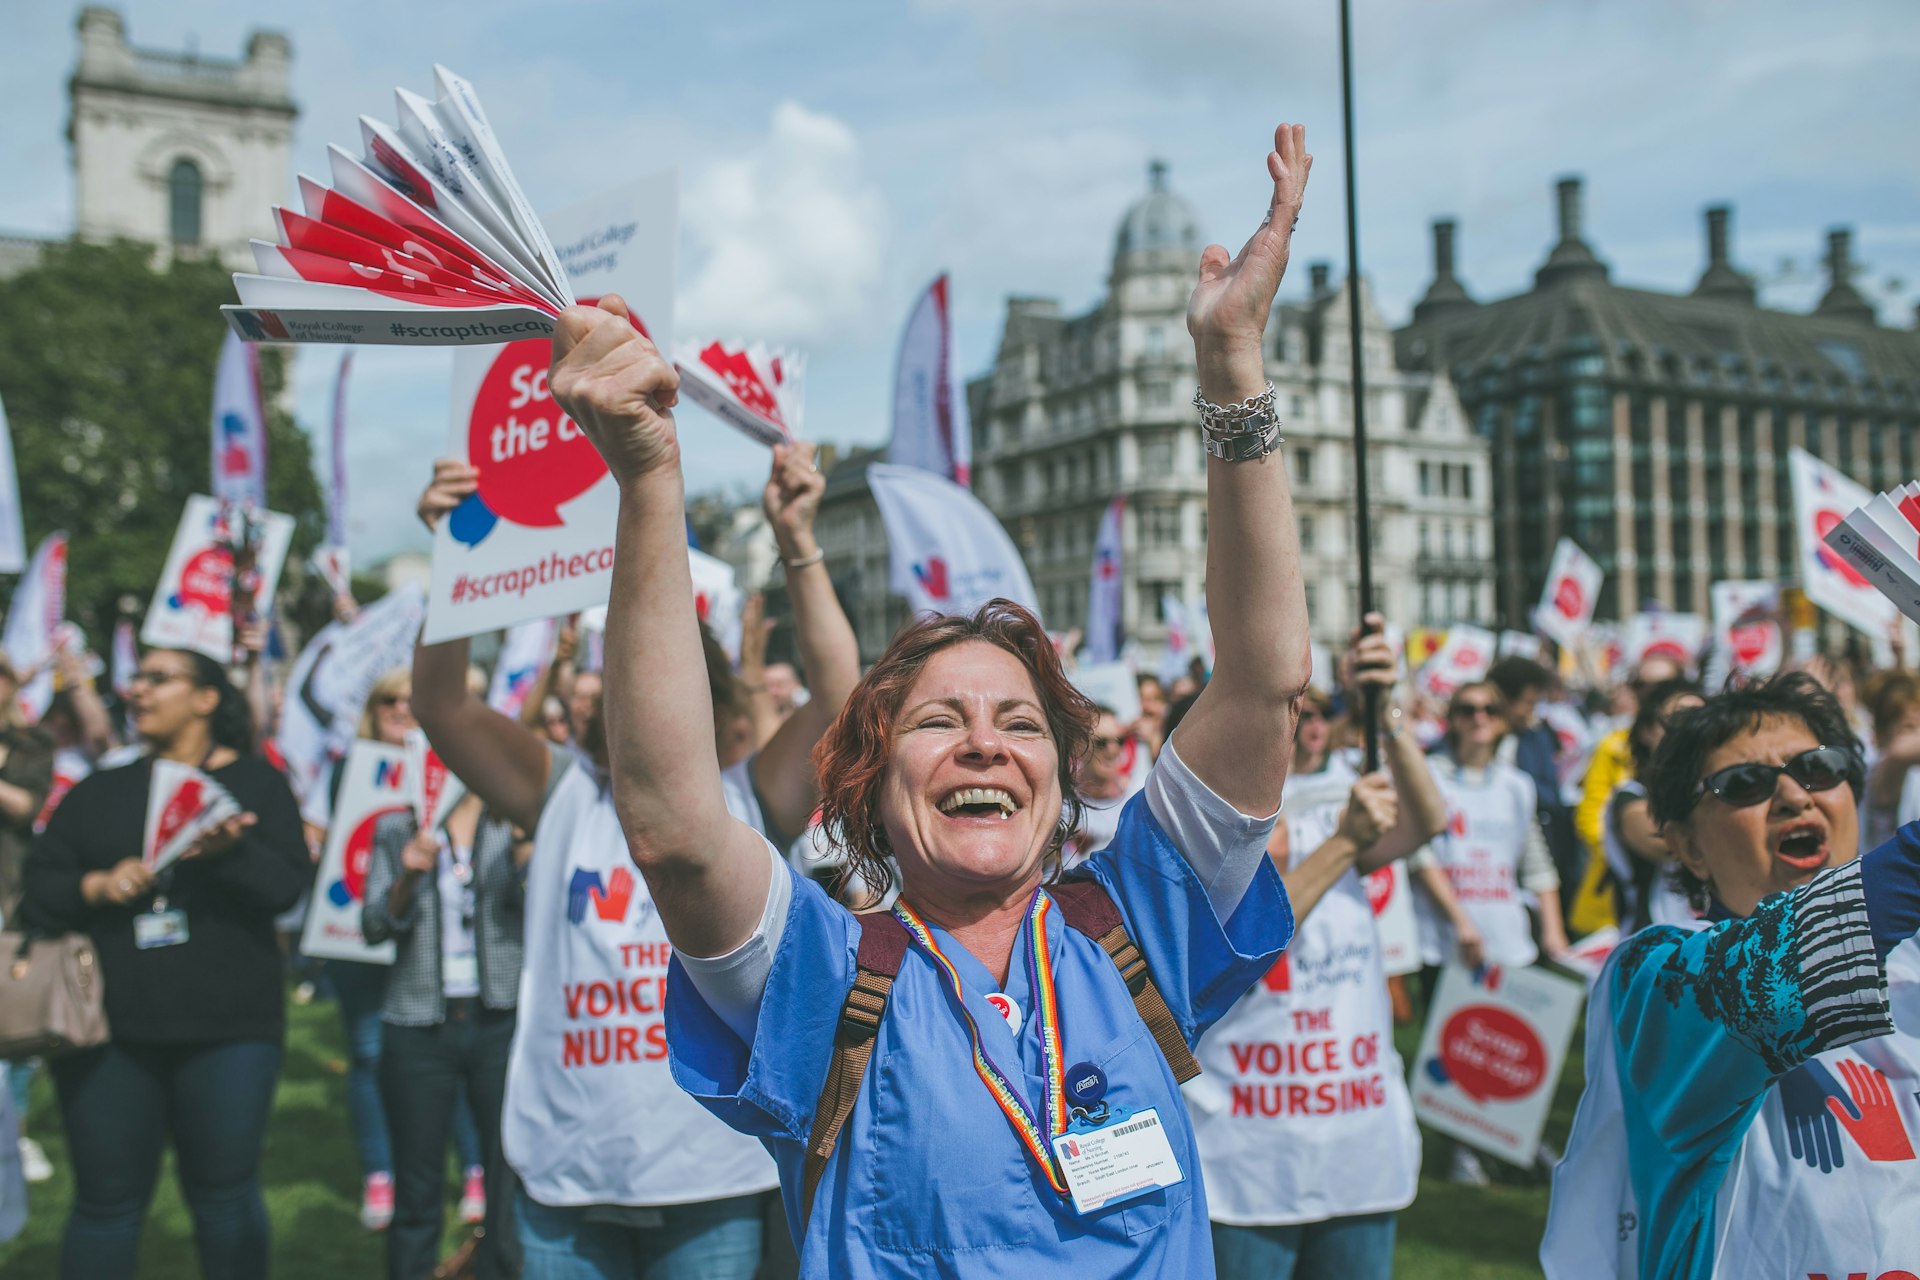 The fabulous NHS nurses demanding to be paid fairly